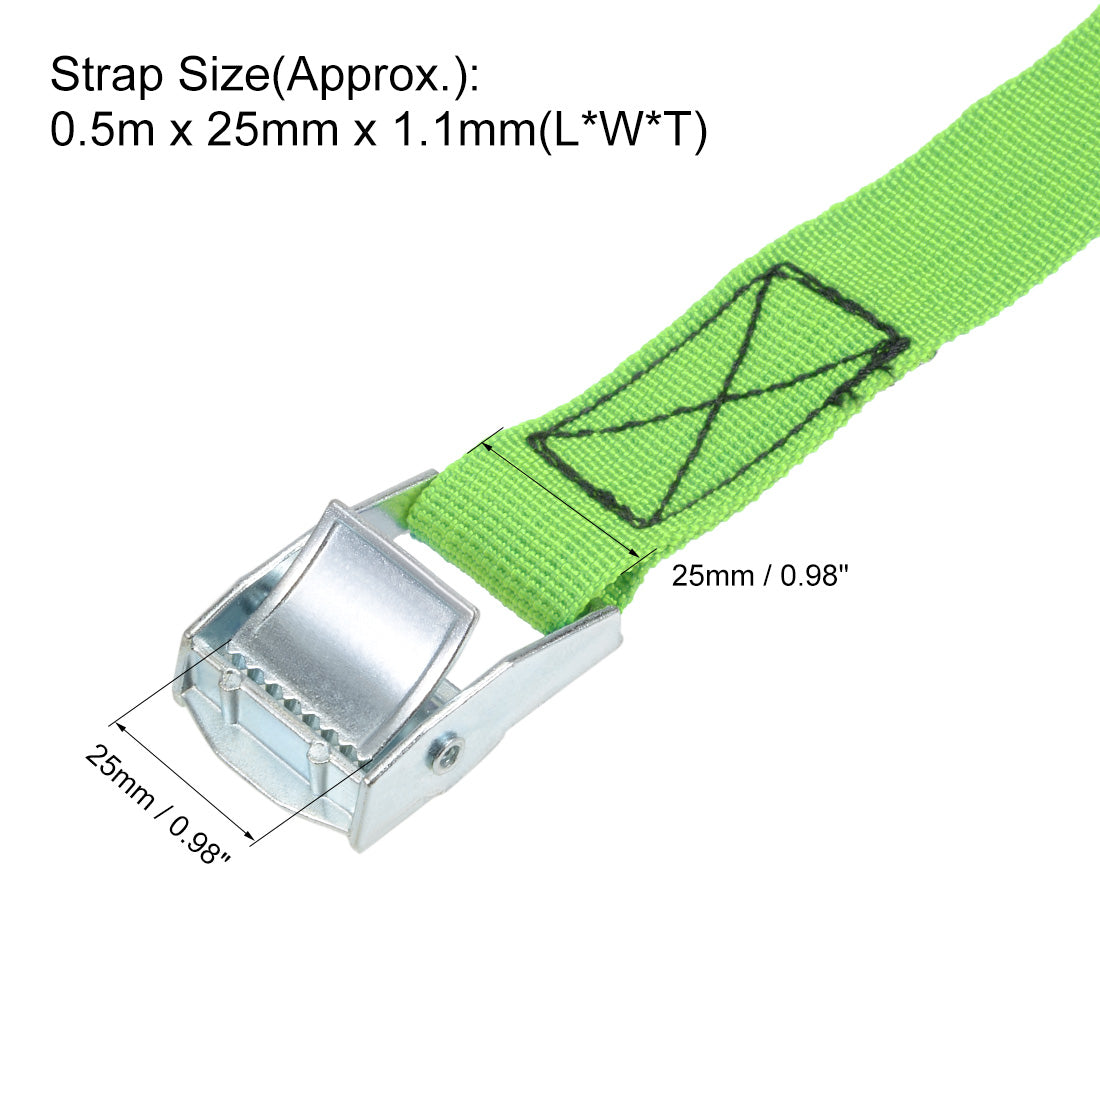 uxcell Uxcell Lashing Strap 1" x 1.6' Cargo Tie Down Straps with Cam Lock Buckle Up to 551lbs Green 4pcs